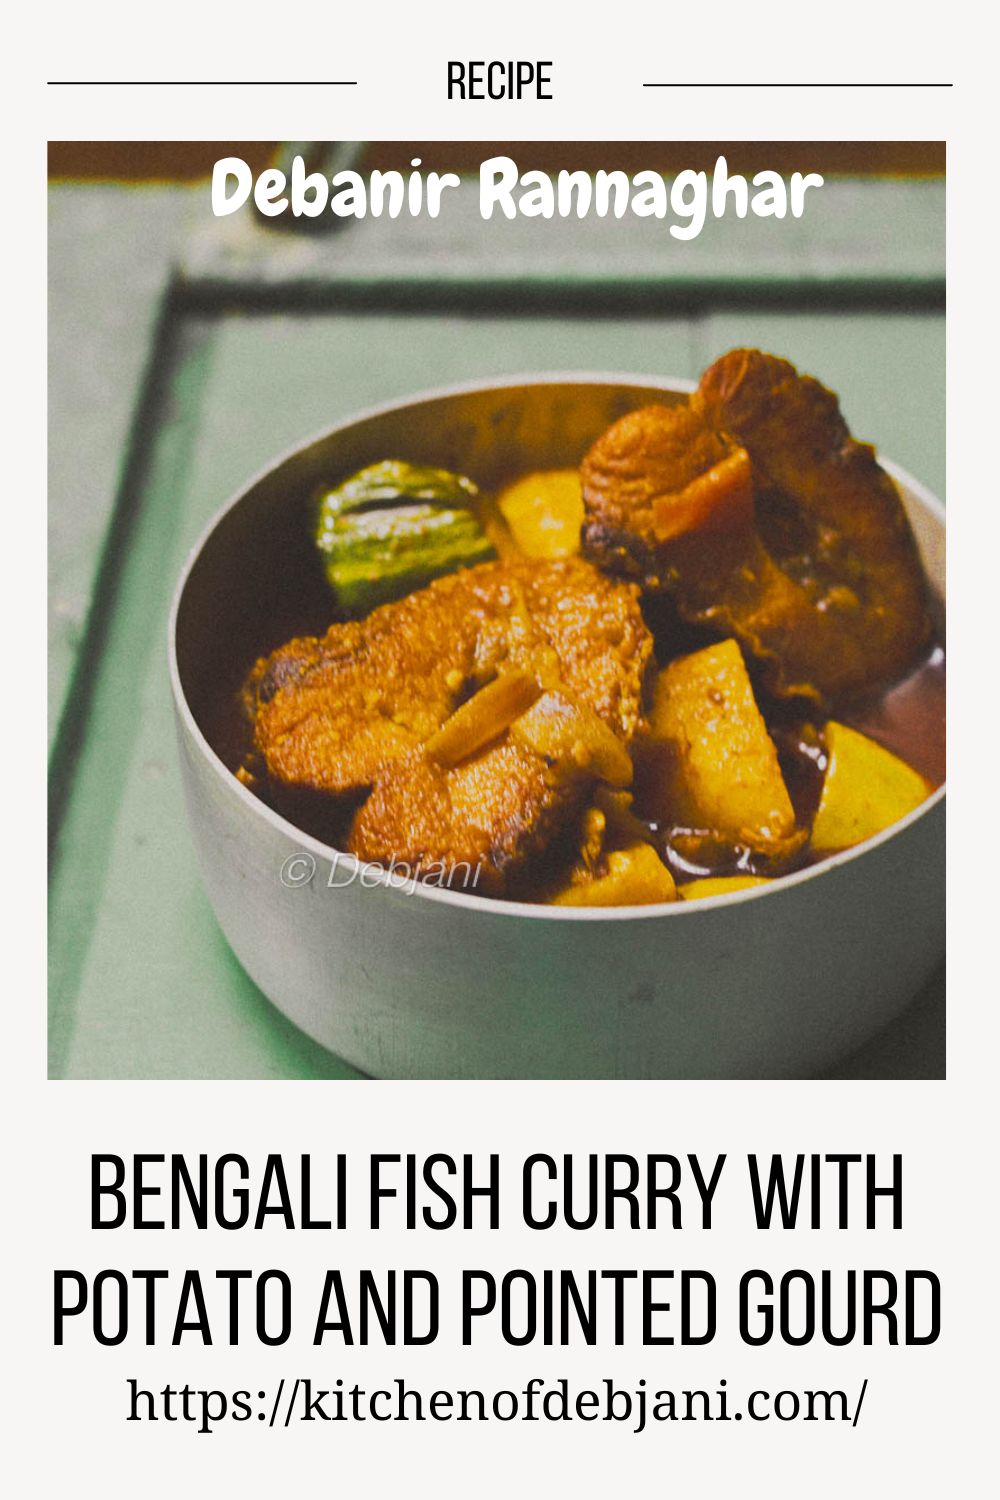 %Bengali Fish Curry with Potato and Pointed Gourd recipe debjanir rannaghar Pinterest Pin